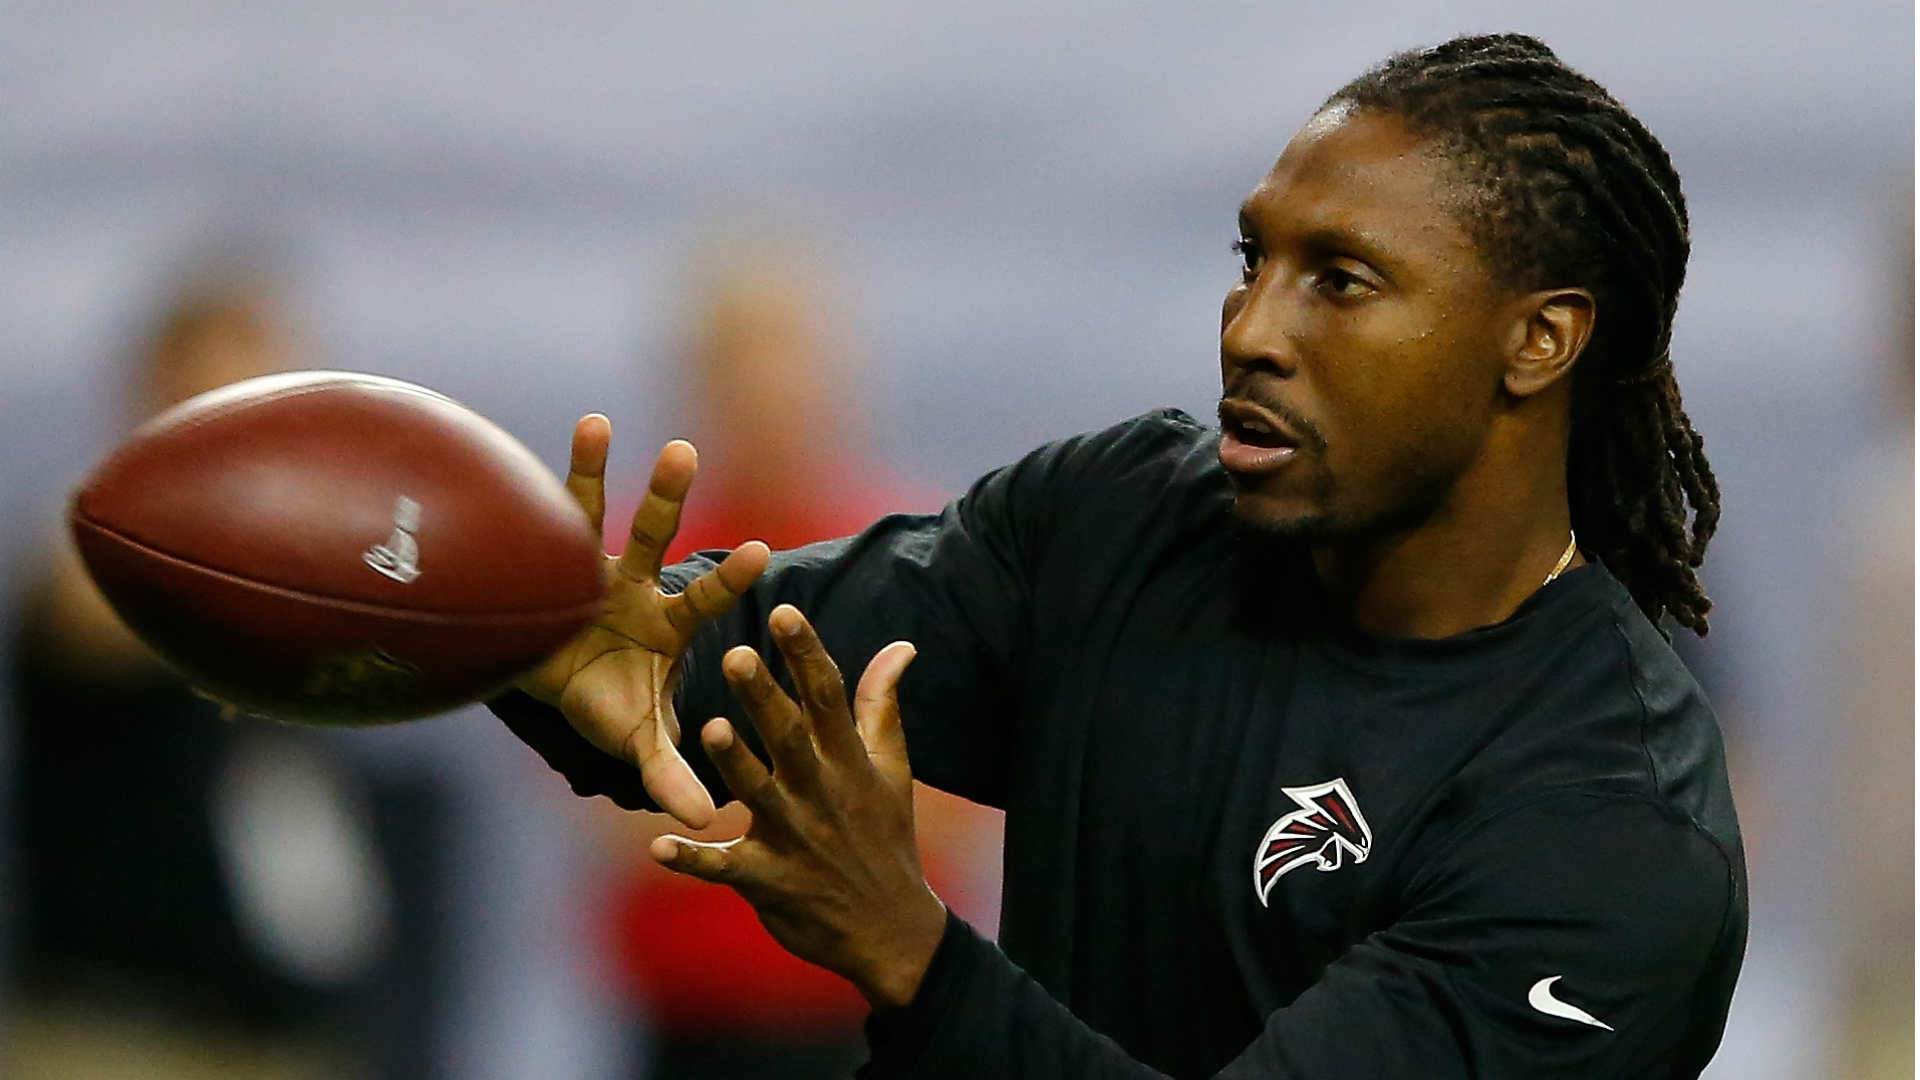 Roddy White defends Cam Newton’s sexist comment to female reporter